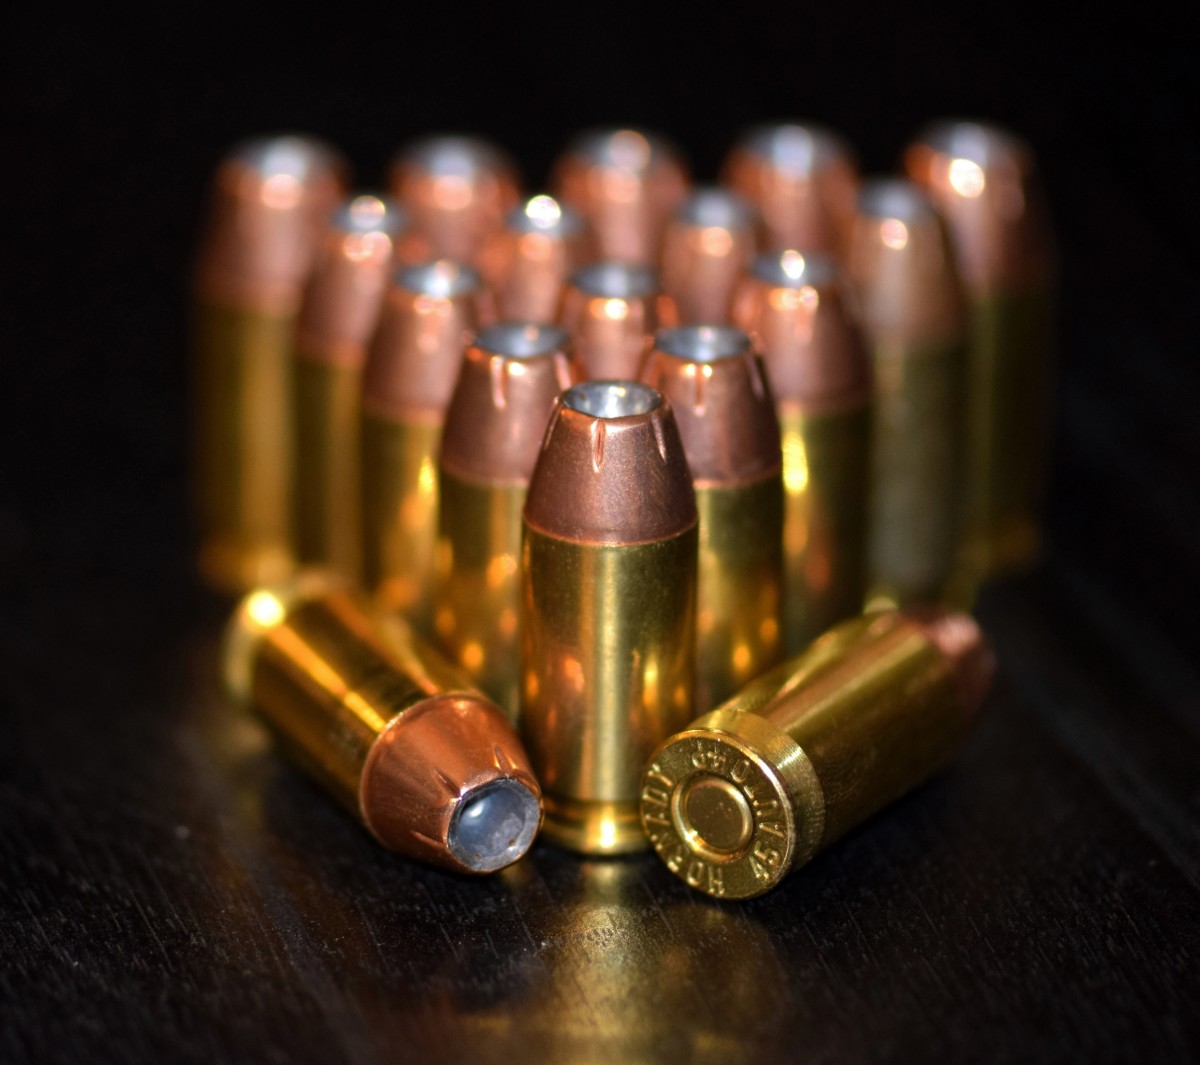 Hollow Point Ammo